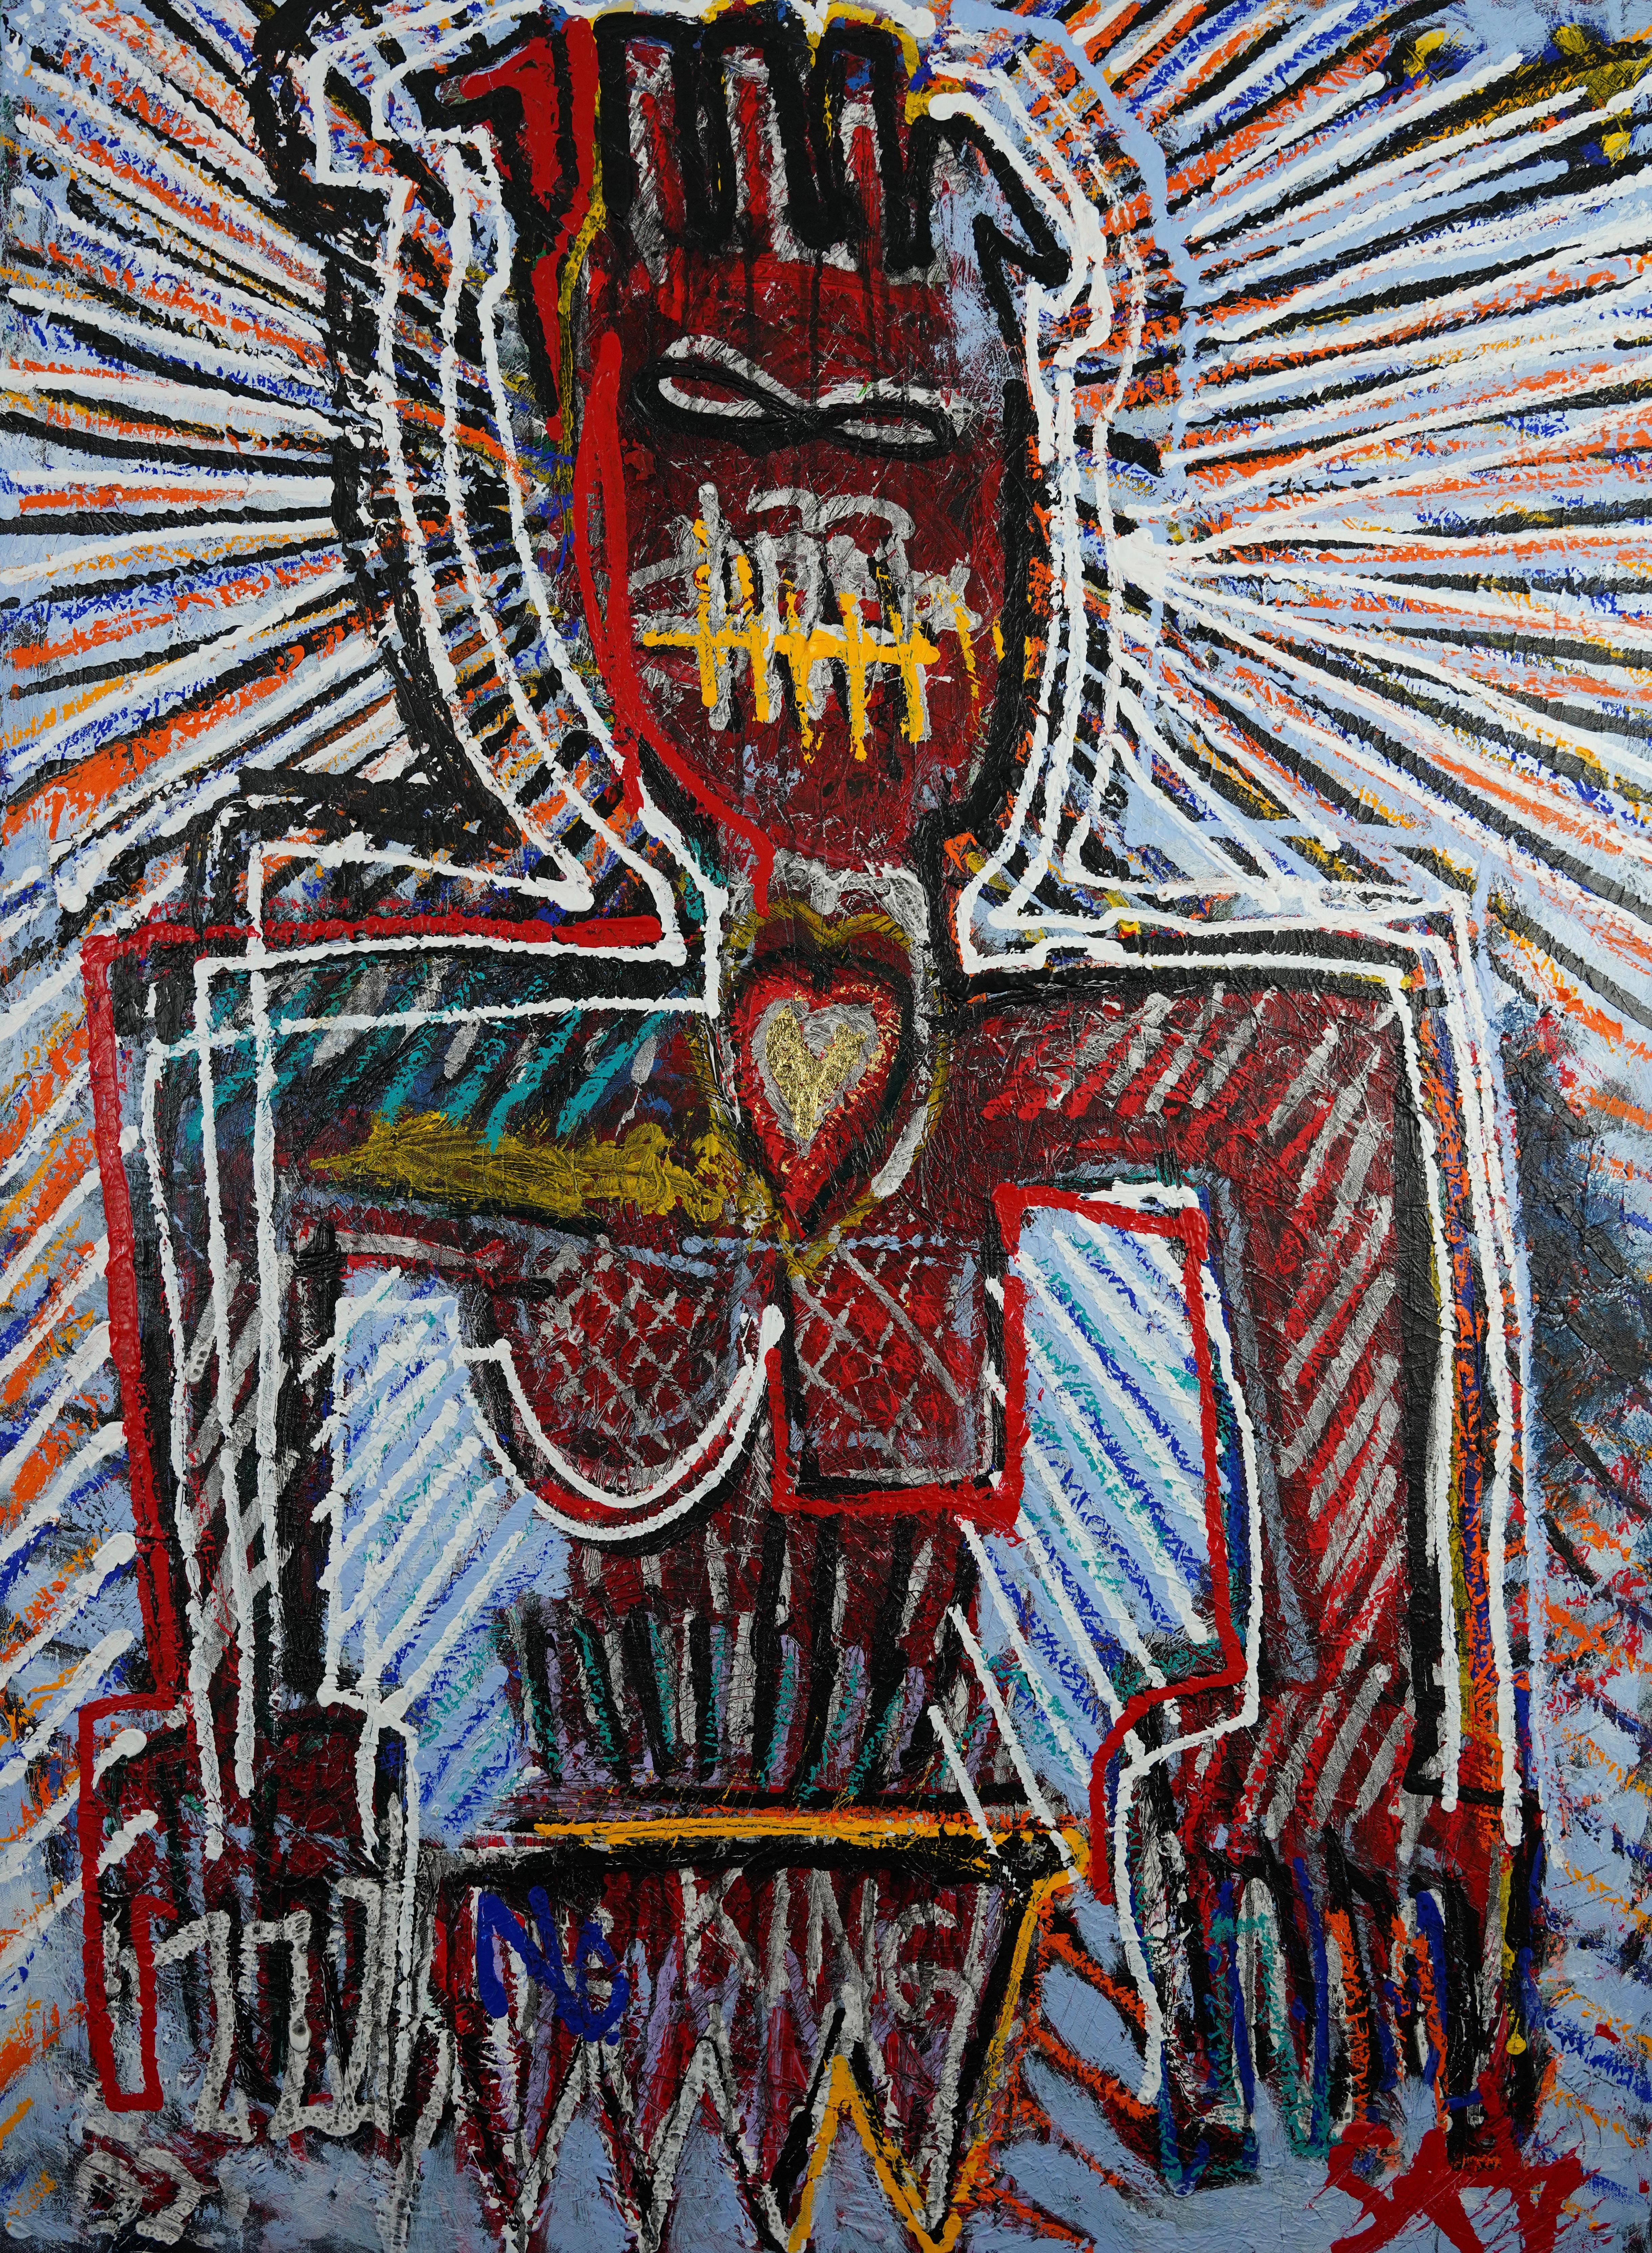 Sax Berlin Figurative Painting - "Westside Watchdawg : The Golden Hearted".  Large Neo Expressionist Oil Painting